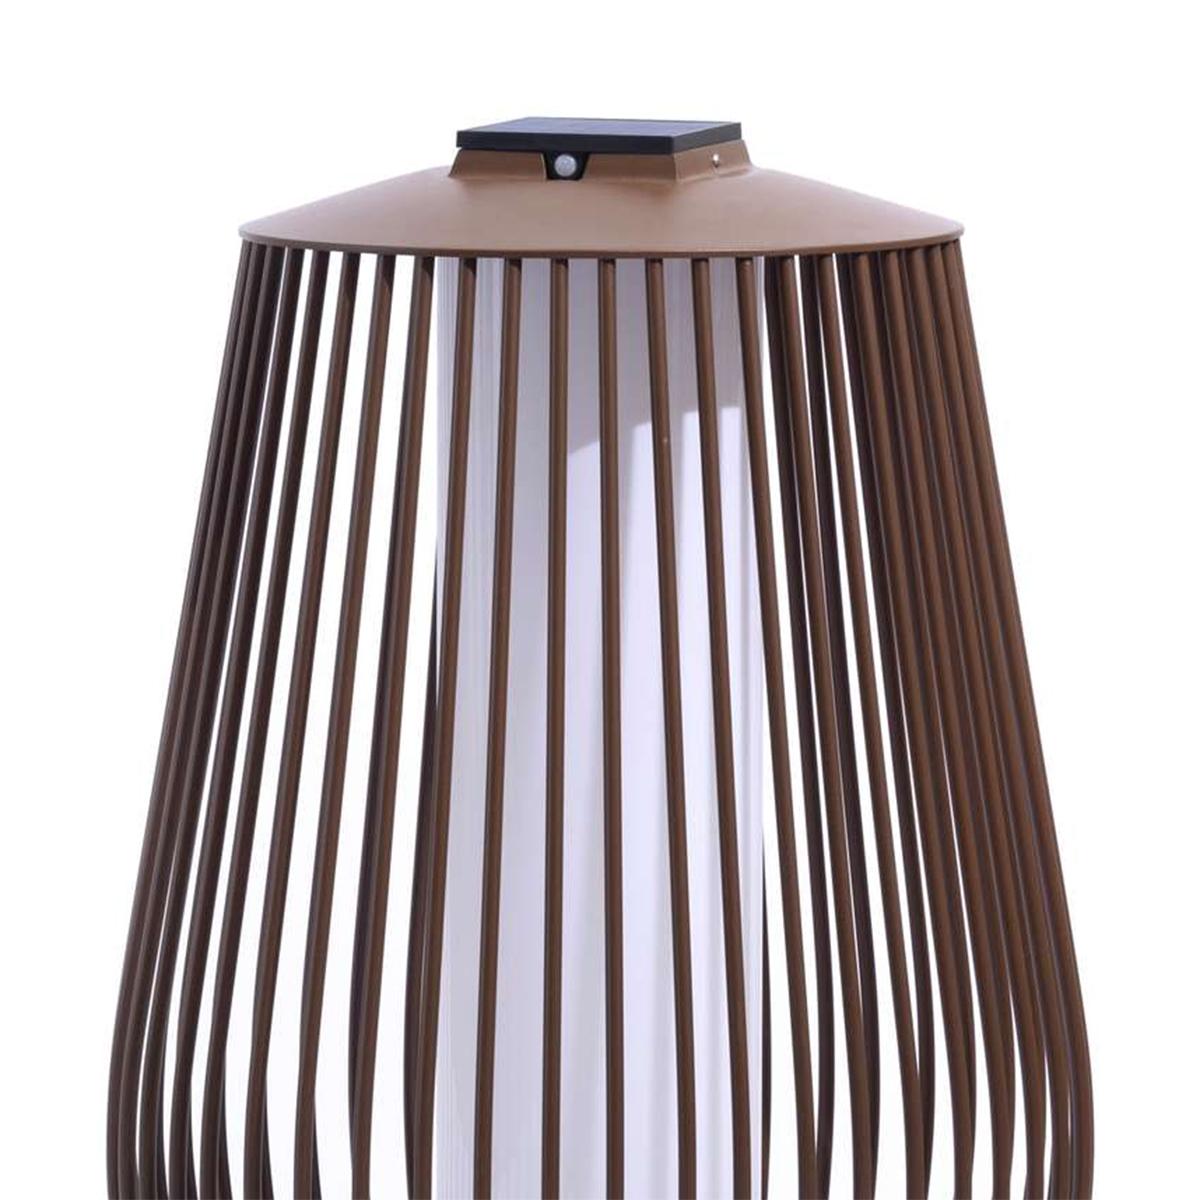 Lantern Ethan Solar with all structure in powder-coated
aluminium in corten finish, outddor-indoor. Solar and rechargeable 
lantern. Also available in black finish, on request.